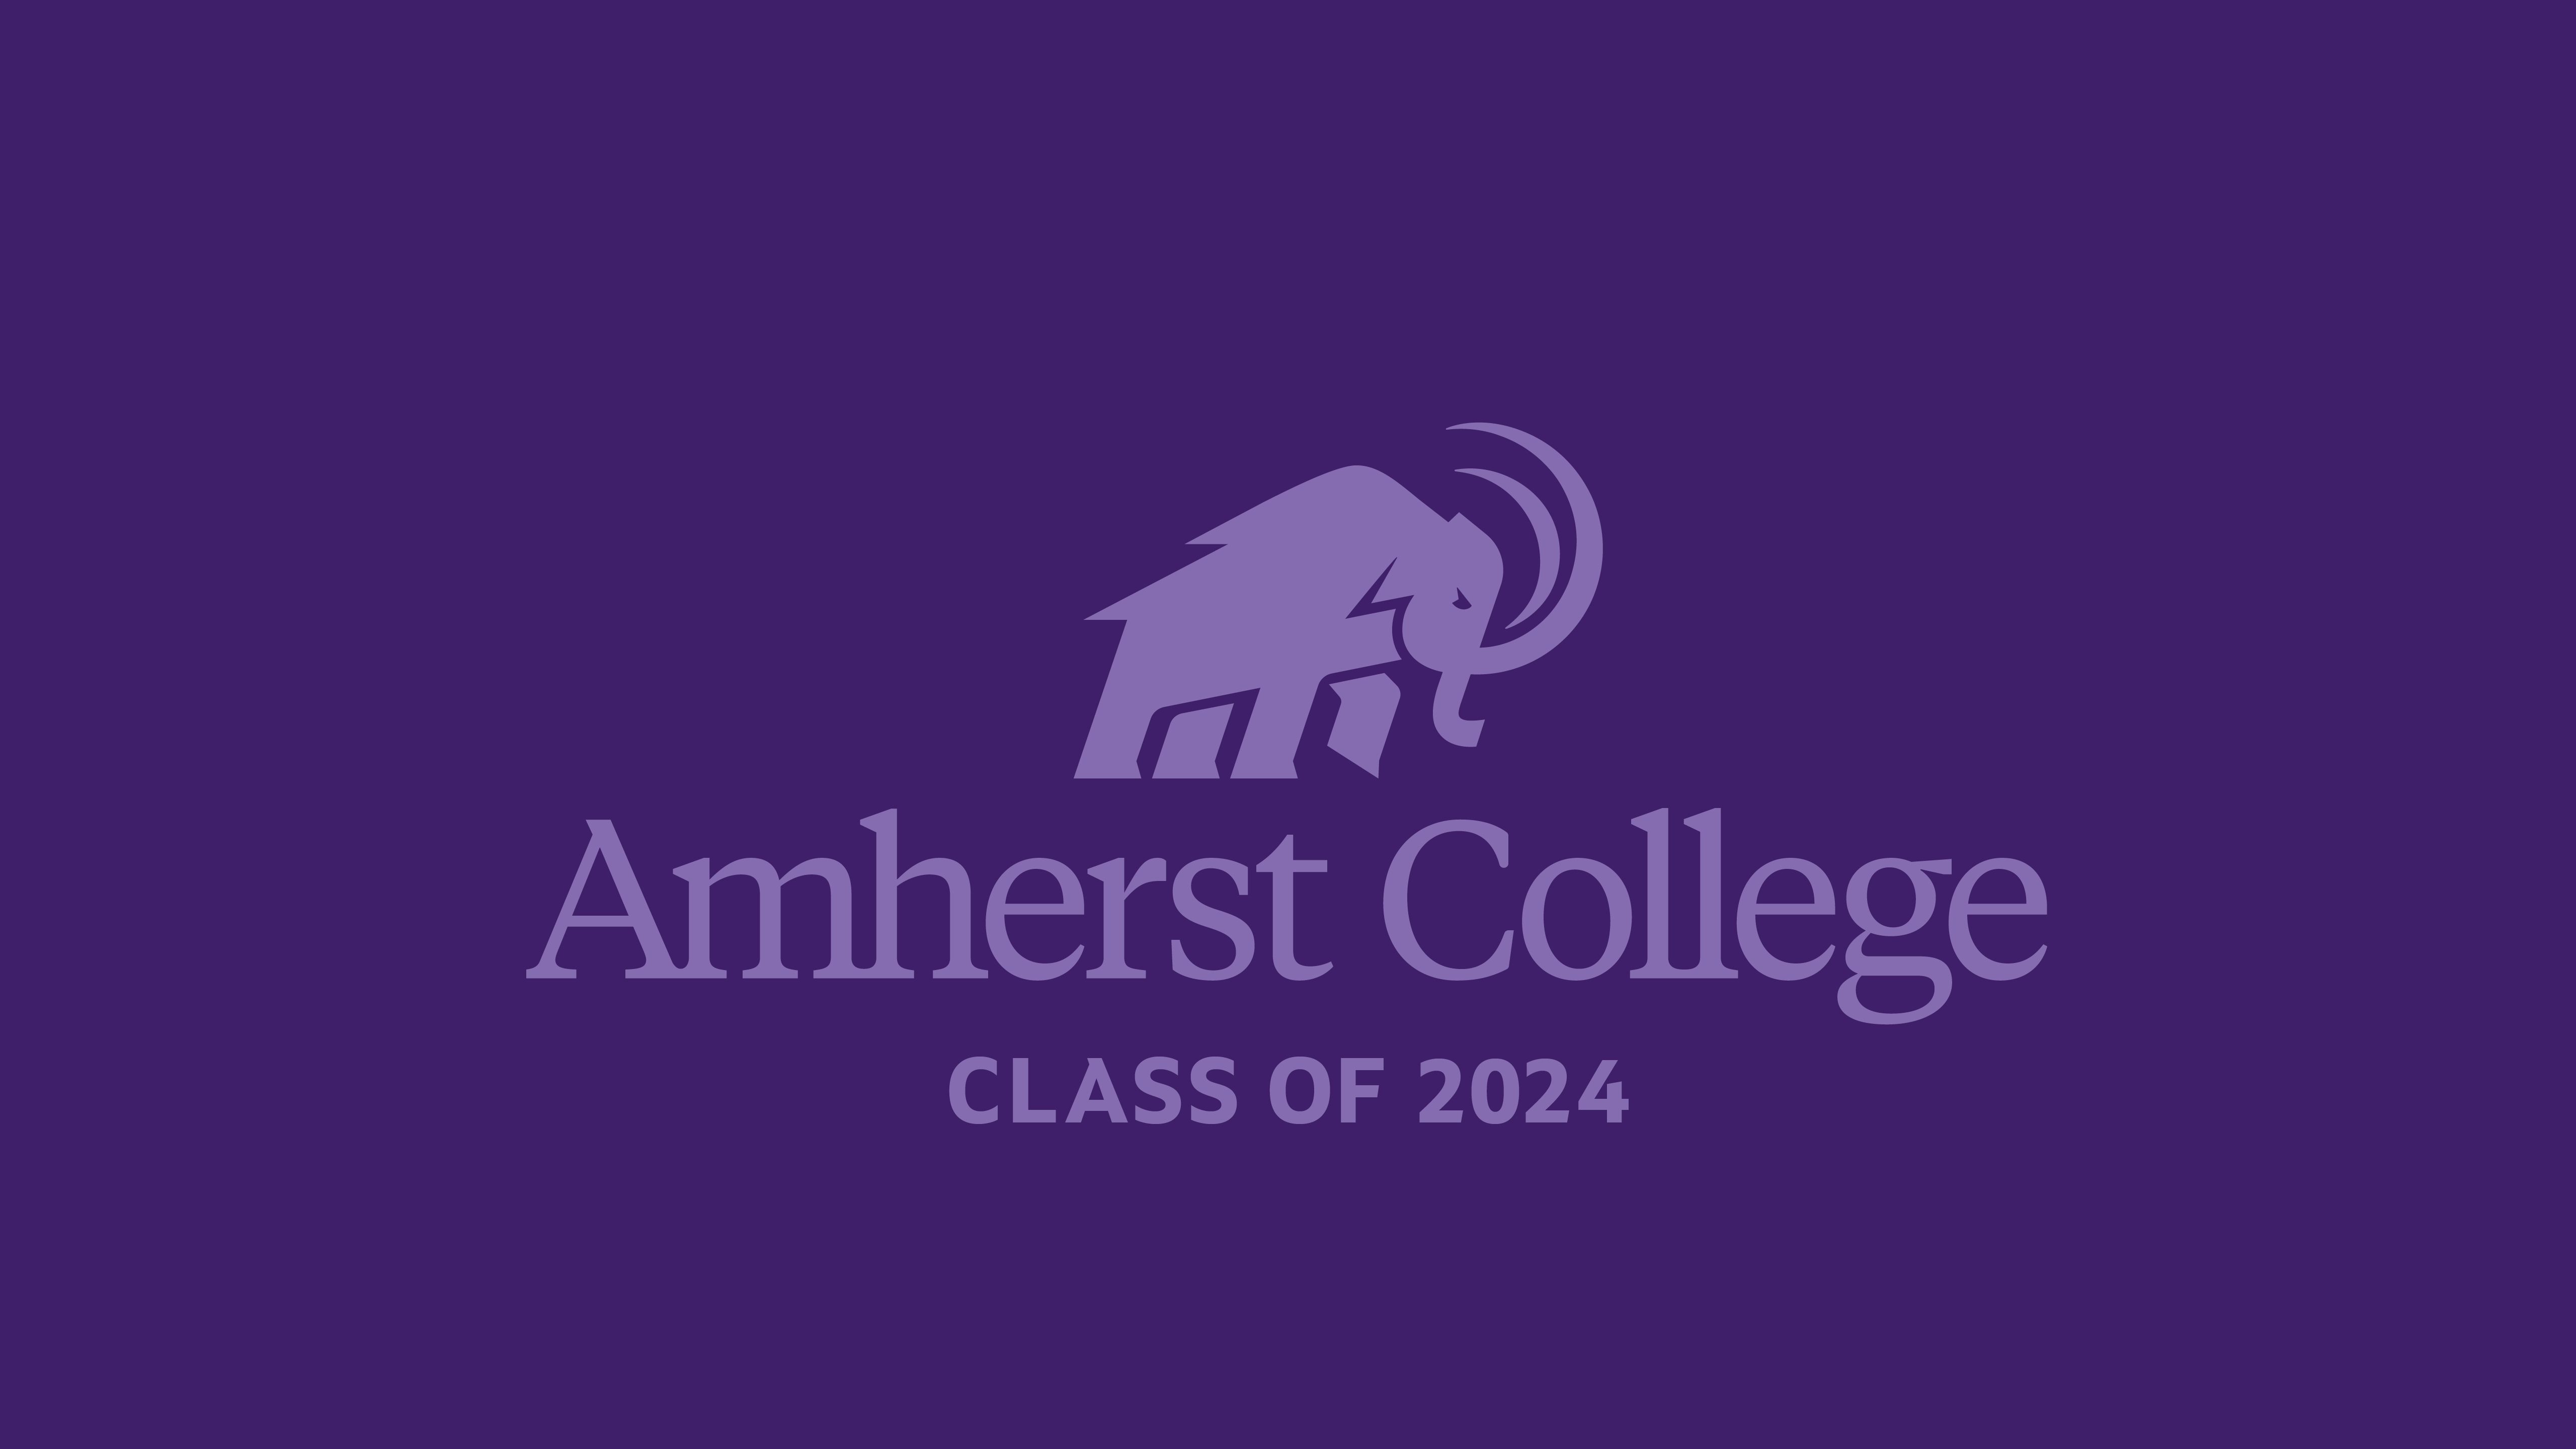 Amherst College Class of 2024 purple background with mammoth